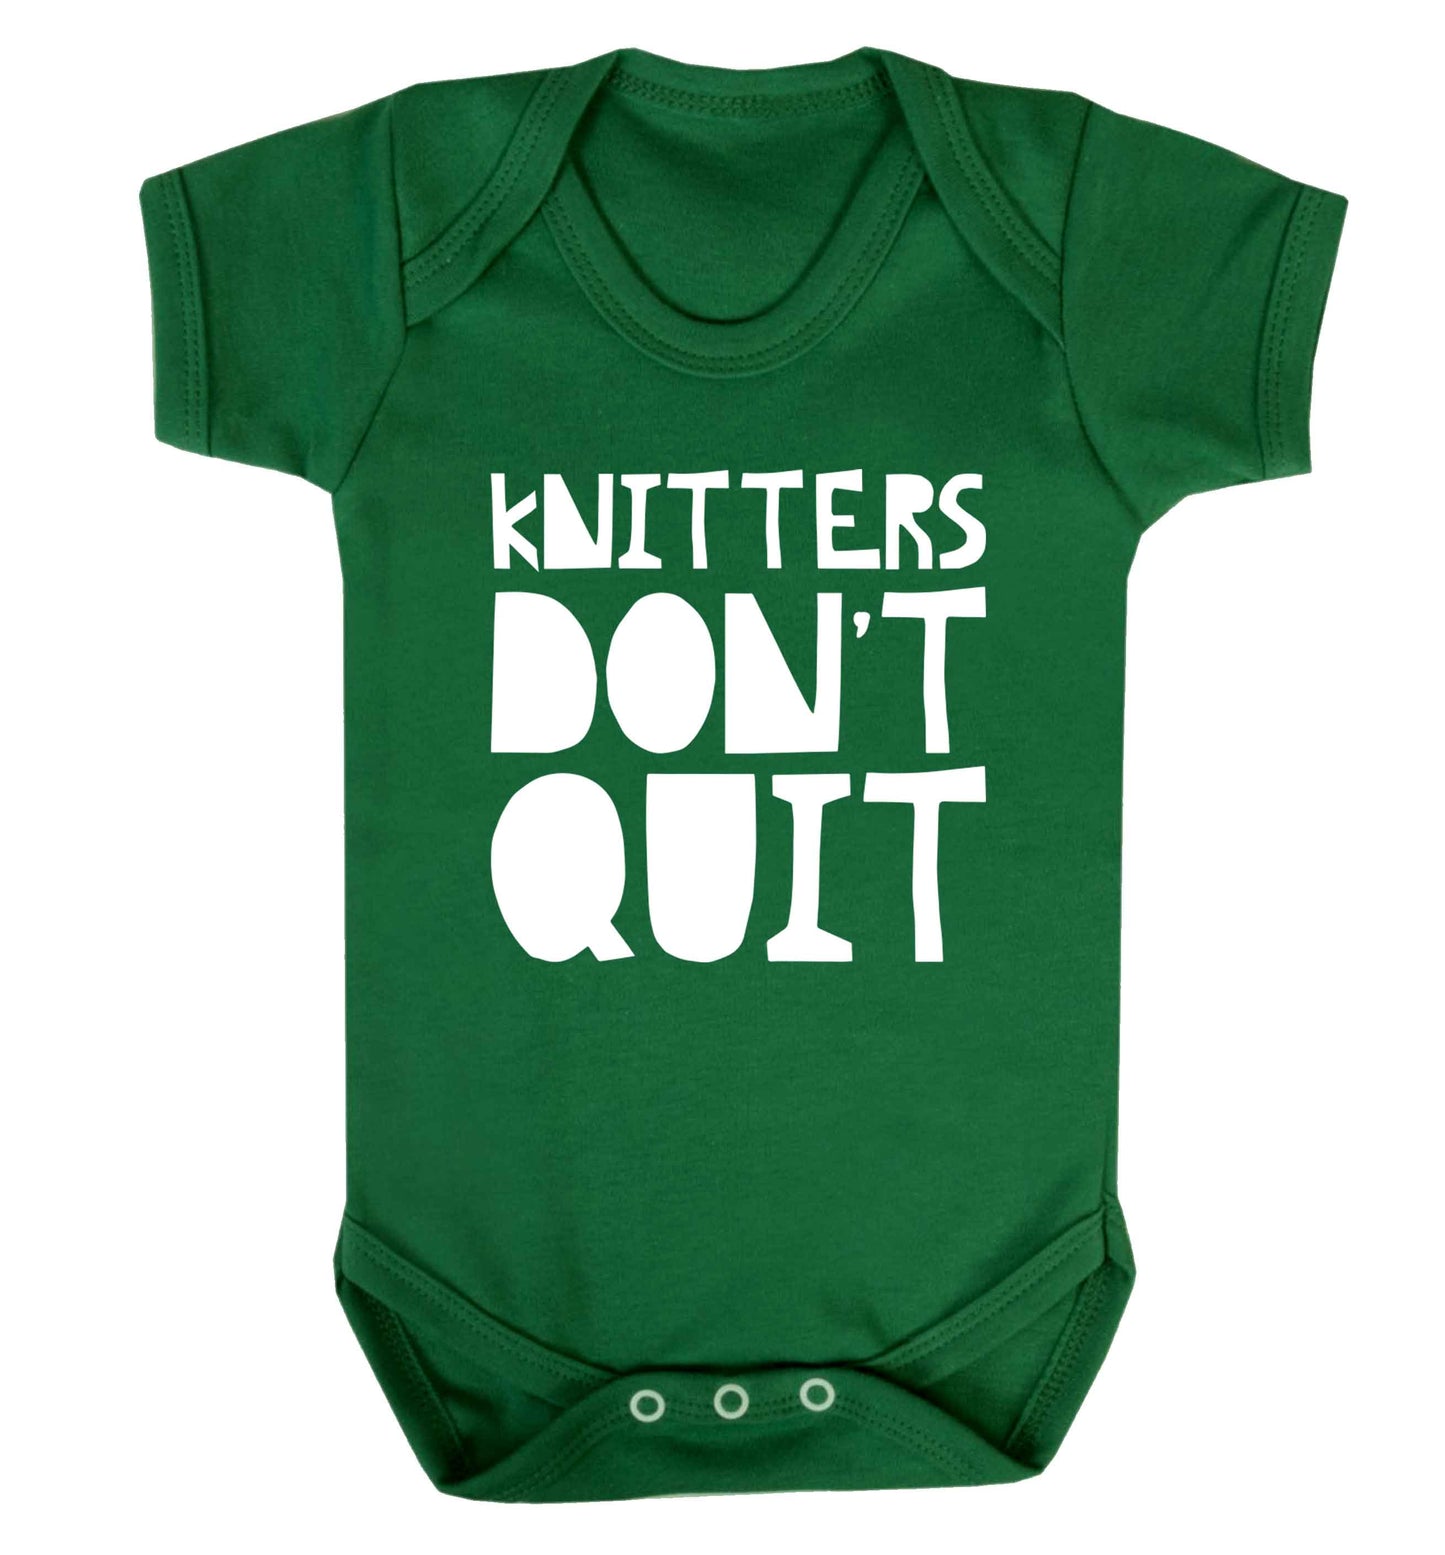 Knitters don't quit Baby Vest green 18-24 months